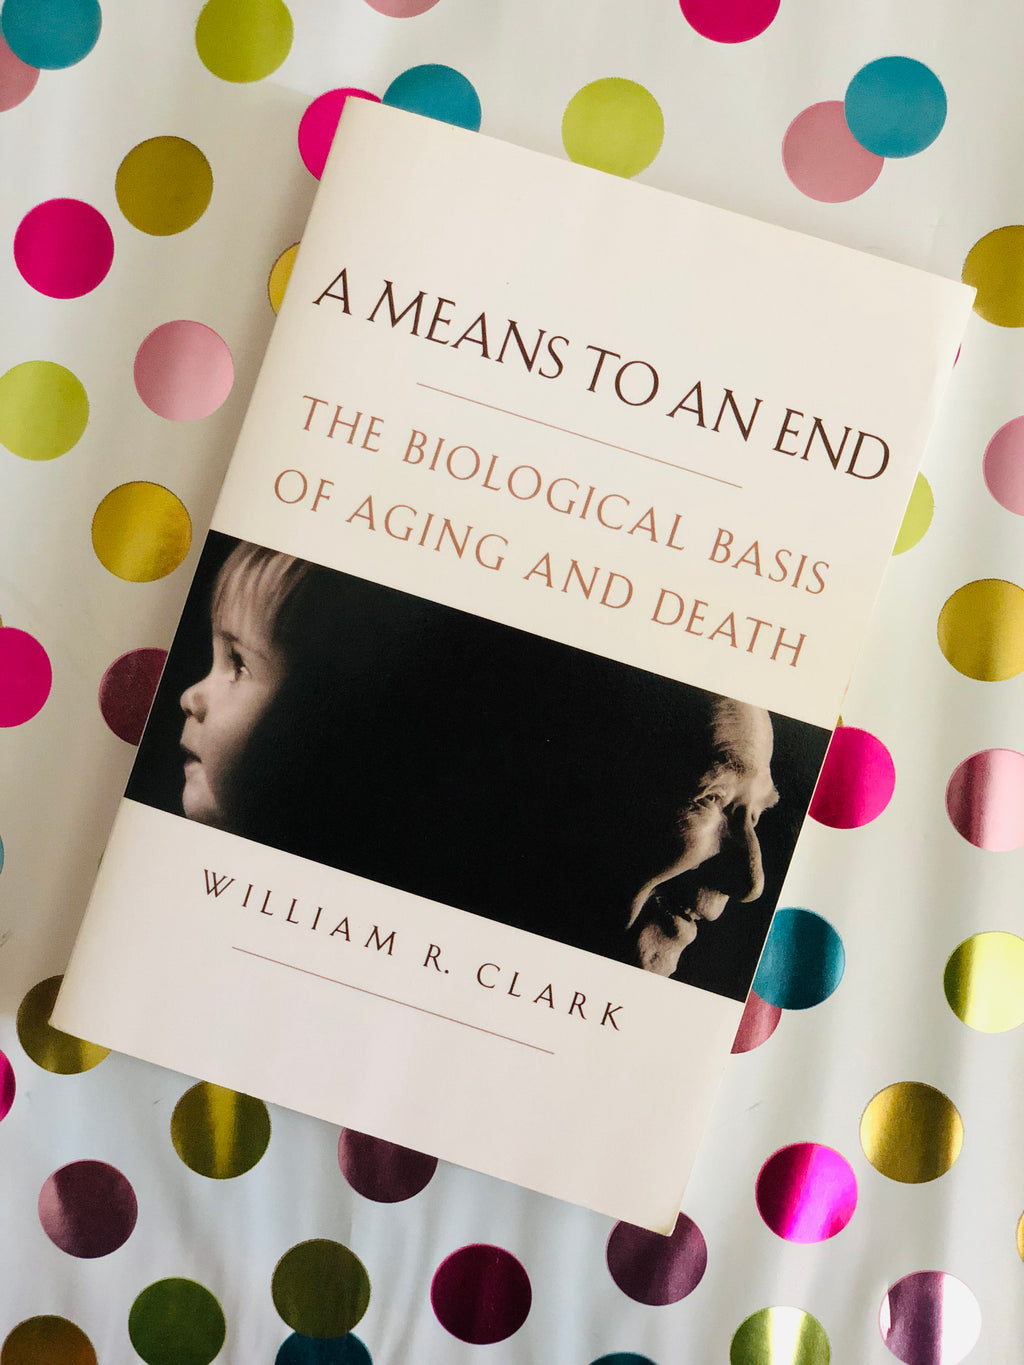 A Means To An End: The Biological Basis of Aging and Death- By William R. Clark